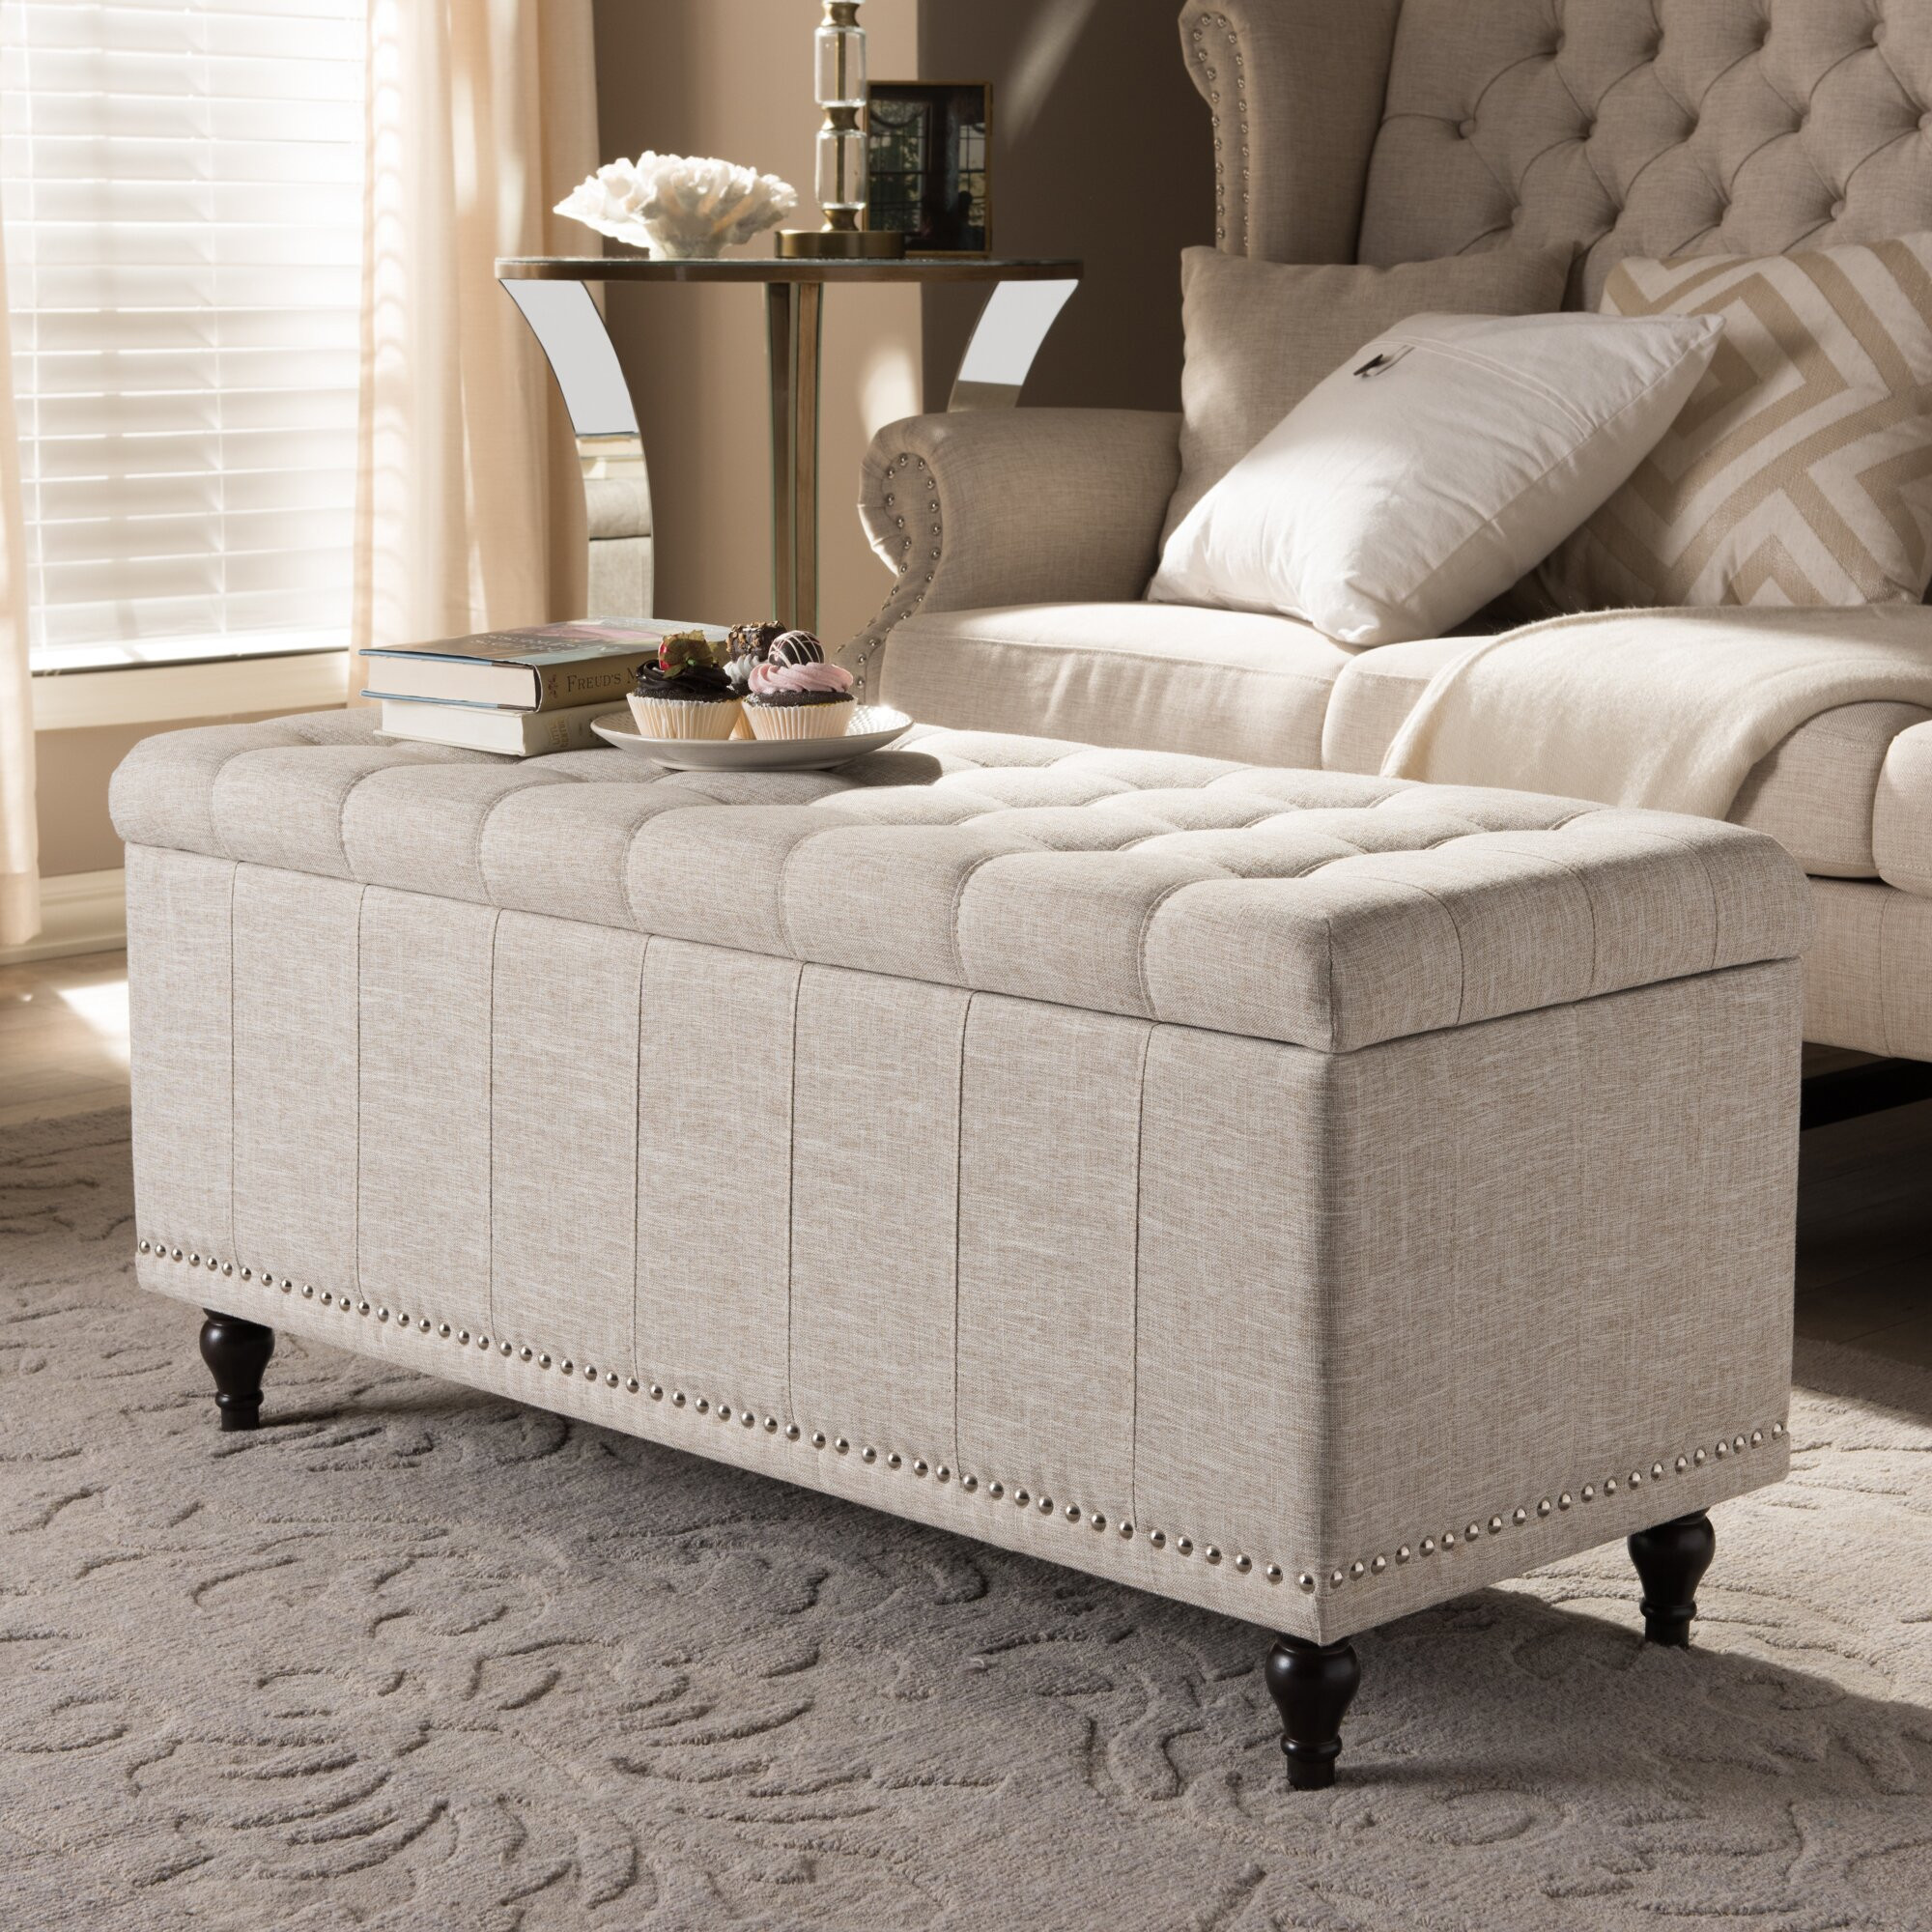 Buying Guide For The Best Bedroom Upholstered Bench